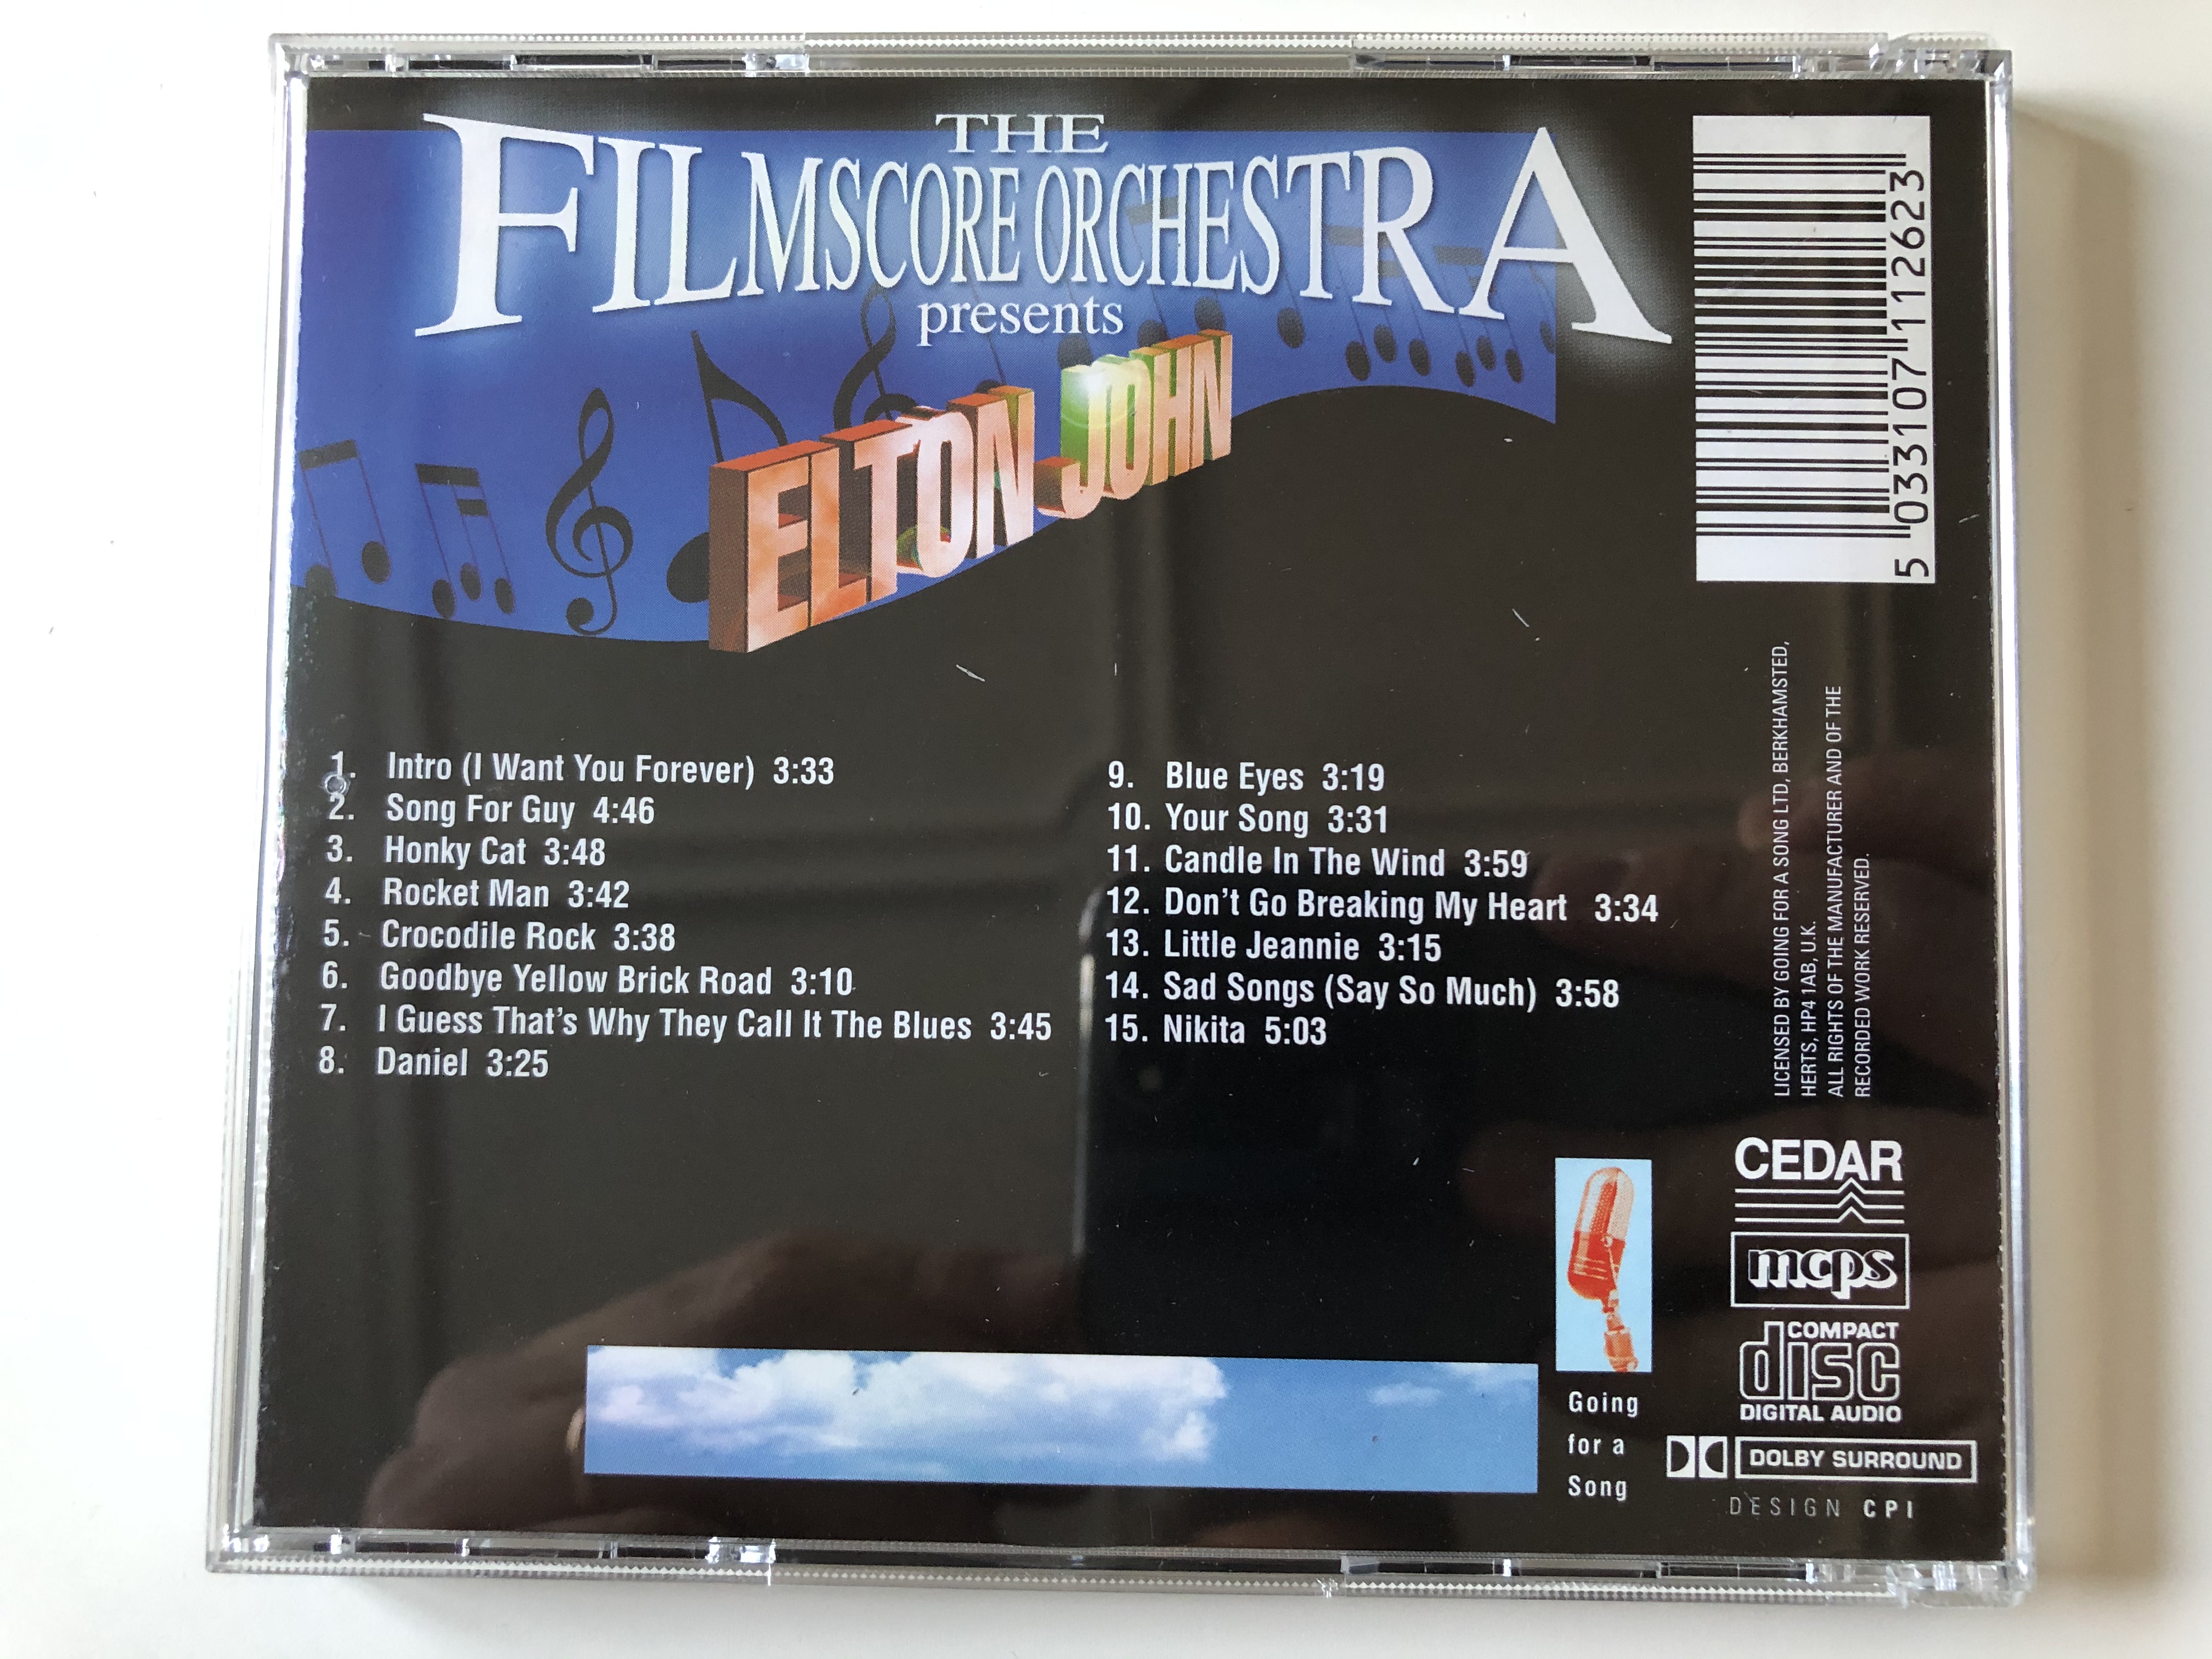 the-film-score-orchestra-presents-the-instrumental-hits-of-elton-john-including-candle-in-the-wind-song-for-guy-rocket-man-daniel-and-many-more-going-for-a-song-audio-cd-gfs126-4-.jpg